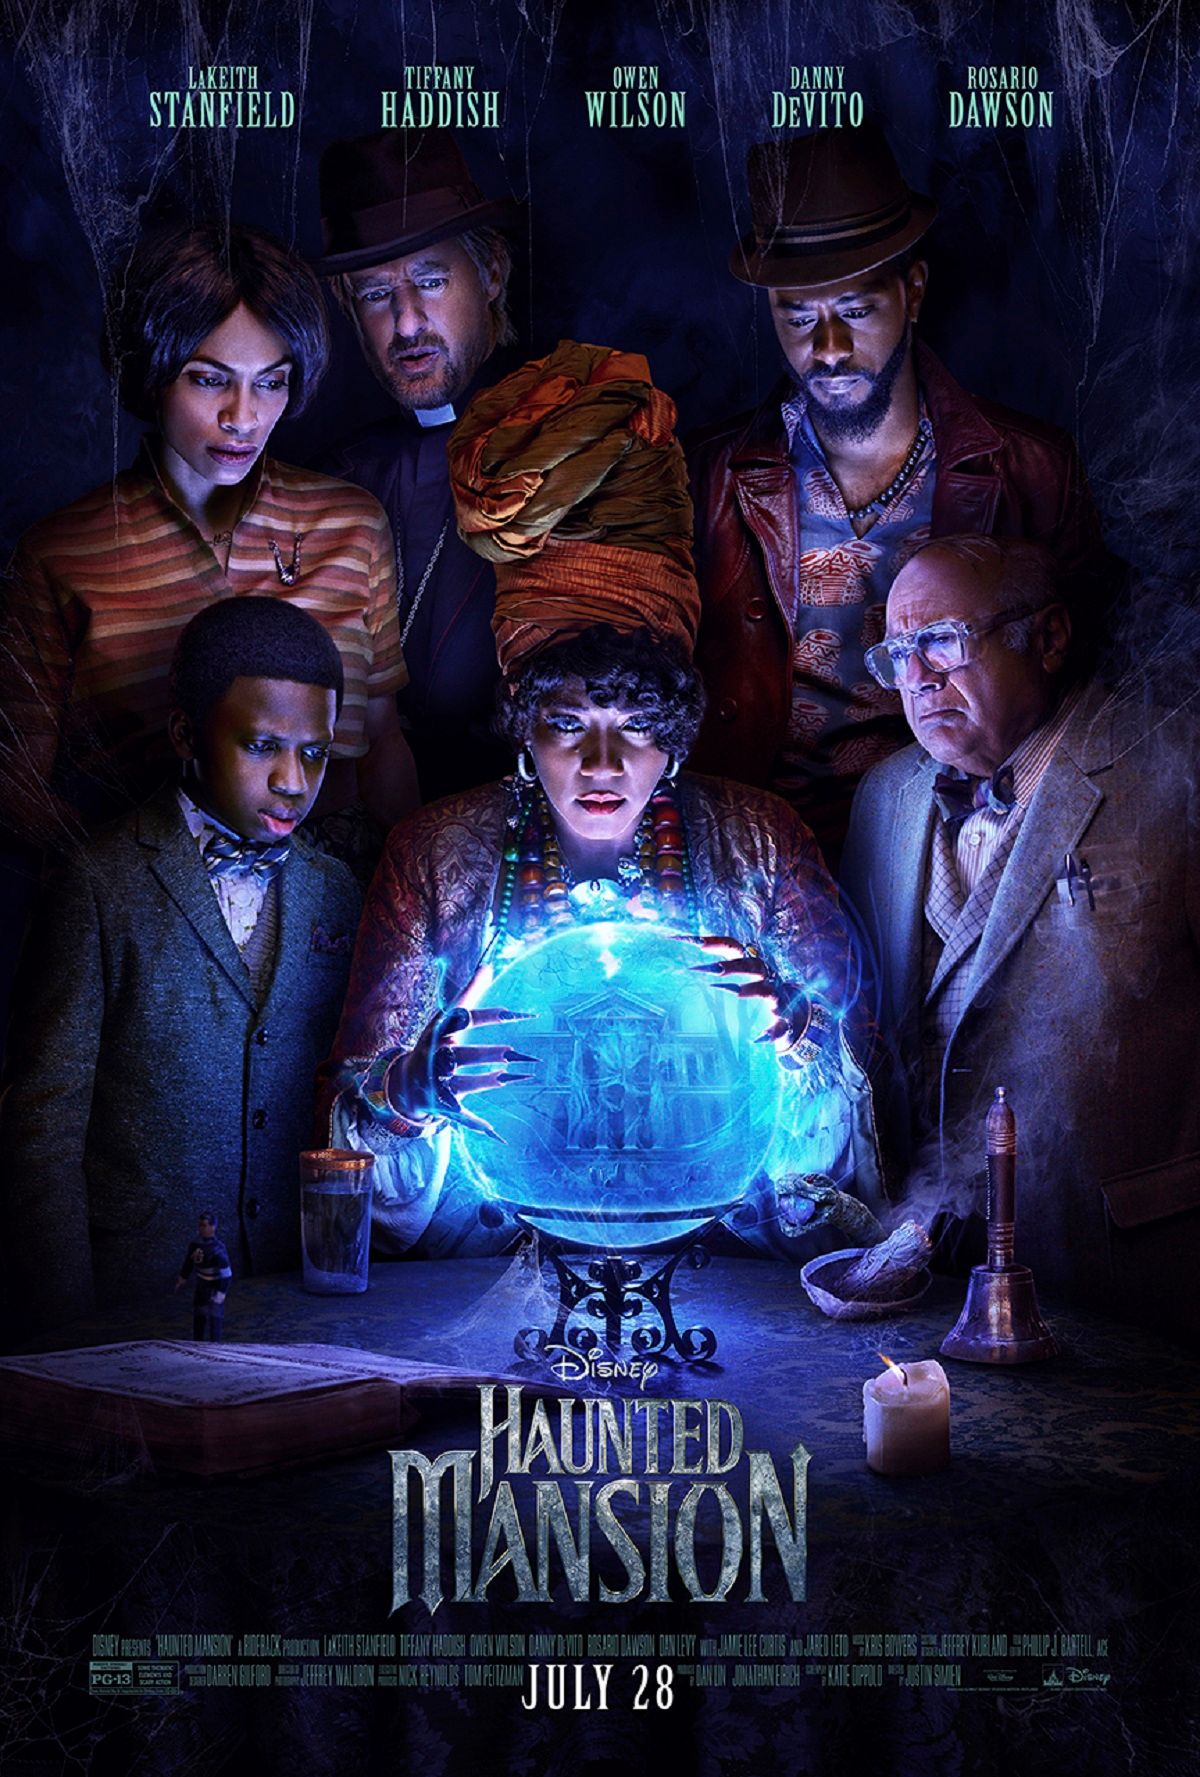 Haunted Mansion Trailer And Poster Tease Terrifying Fun From Disney